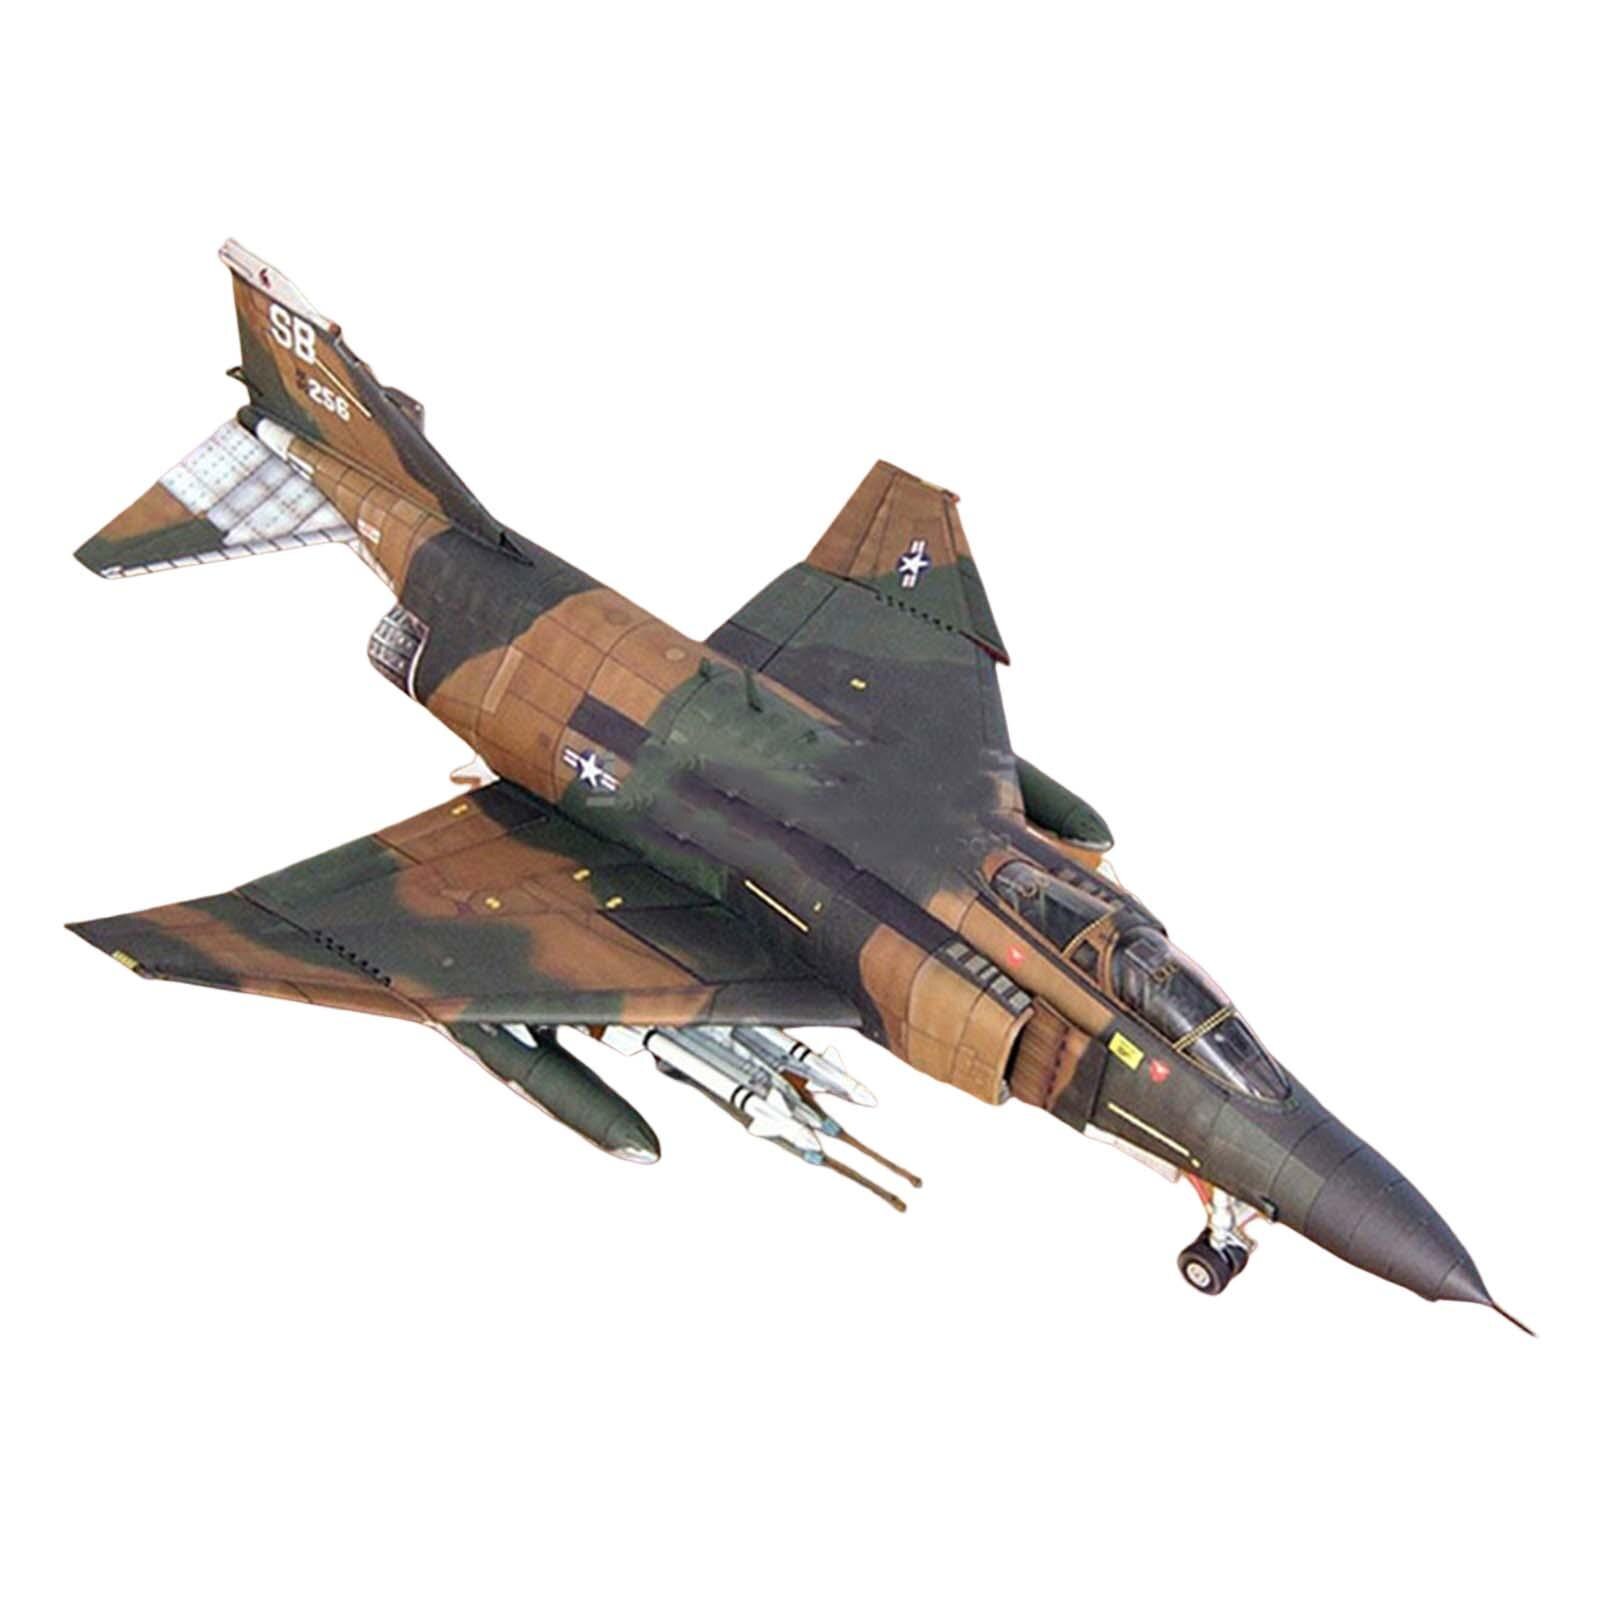 1/33 American Plane Model Puzzle Toy DIY F-4B Display Ornaments Fighter Model for Desktop Table Room Gift Collection